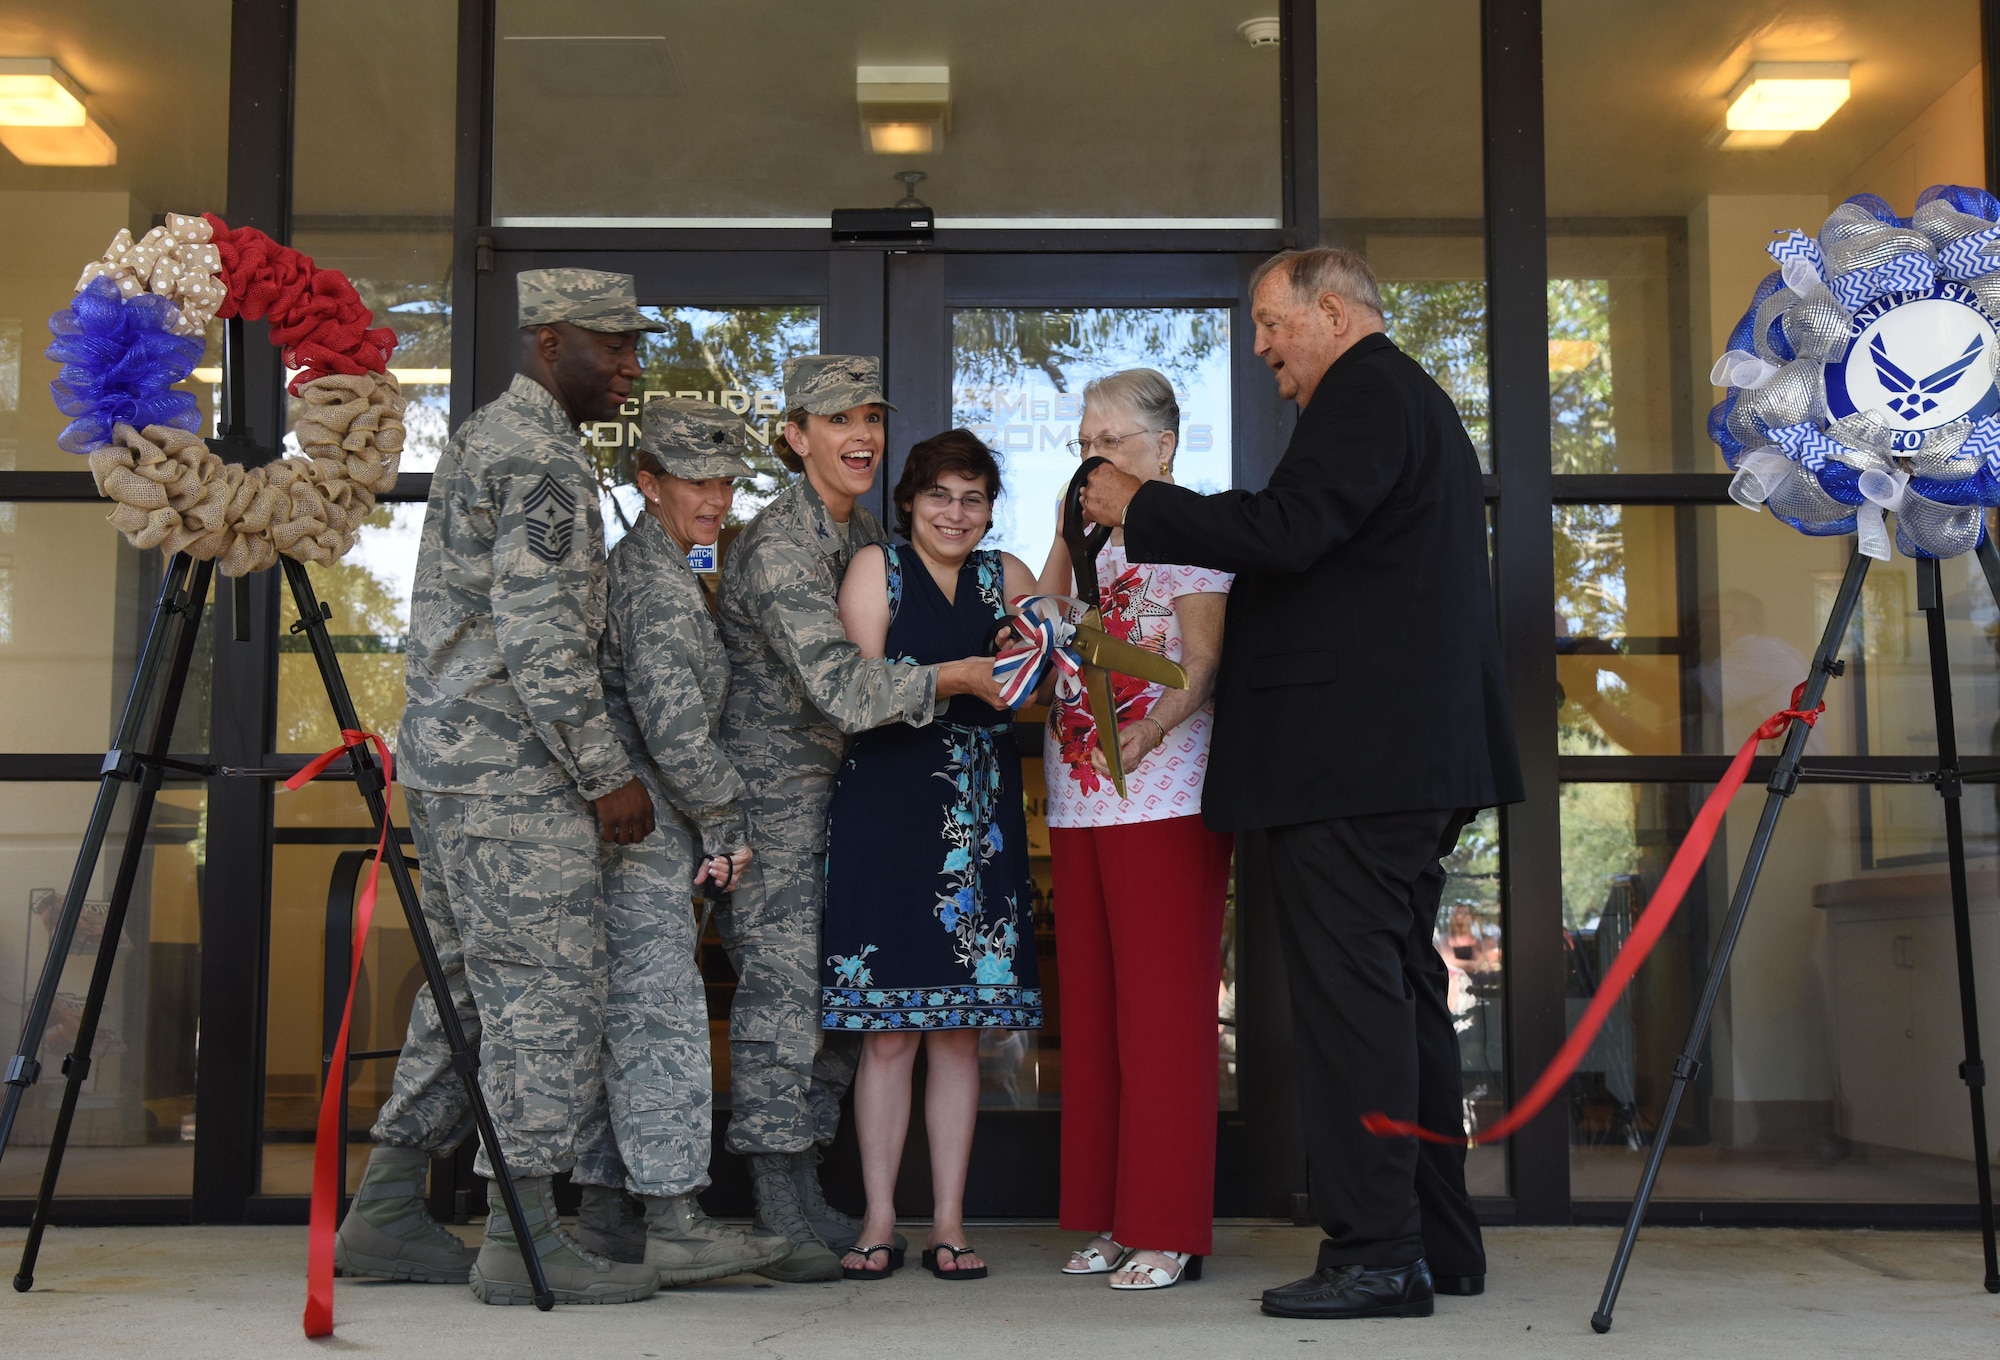 Keesler leadership and family members of Maj. Edward McBride participate in a ribbon cutting during the McBride Commons Grand Opening ceremony May 16, 2017, on Keesler Air Force Base, Miss. The nine-month project transformed the former base library into a common area with a children’s library, computer stations, engraving, framing, marketing and print shops and a full kitchen for those with base access. (U.S. Air Force photo by Kemberly Groue)